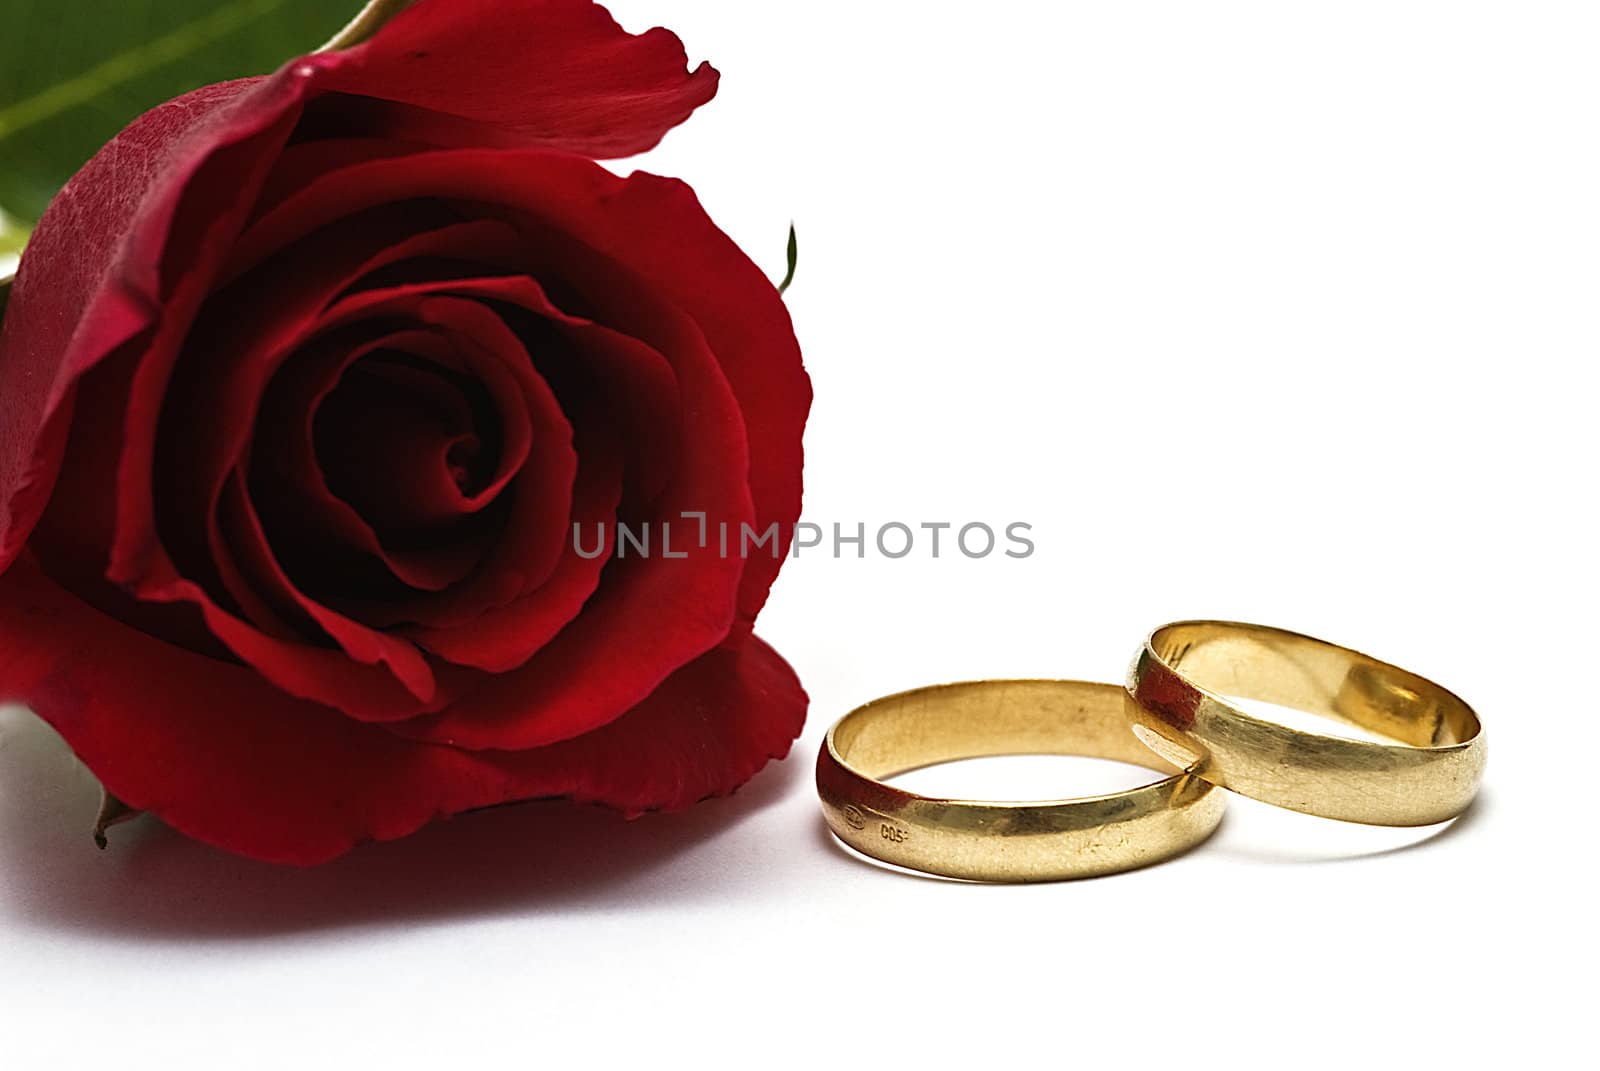 Wedding rings and red roses. by angelsimon